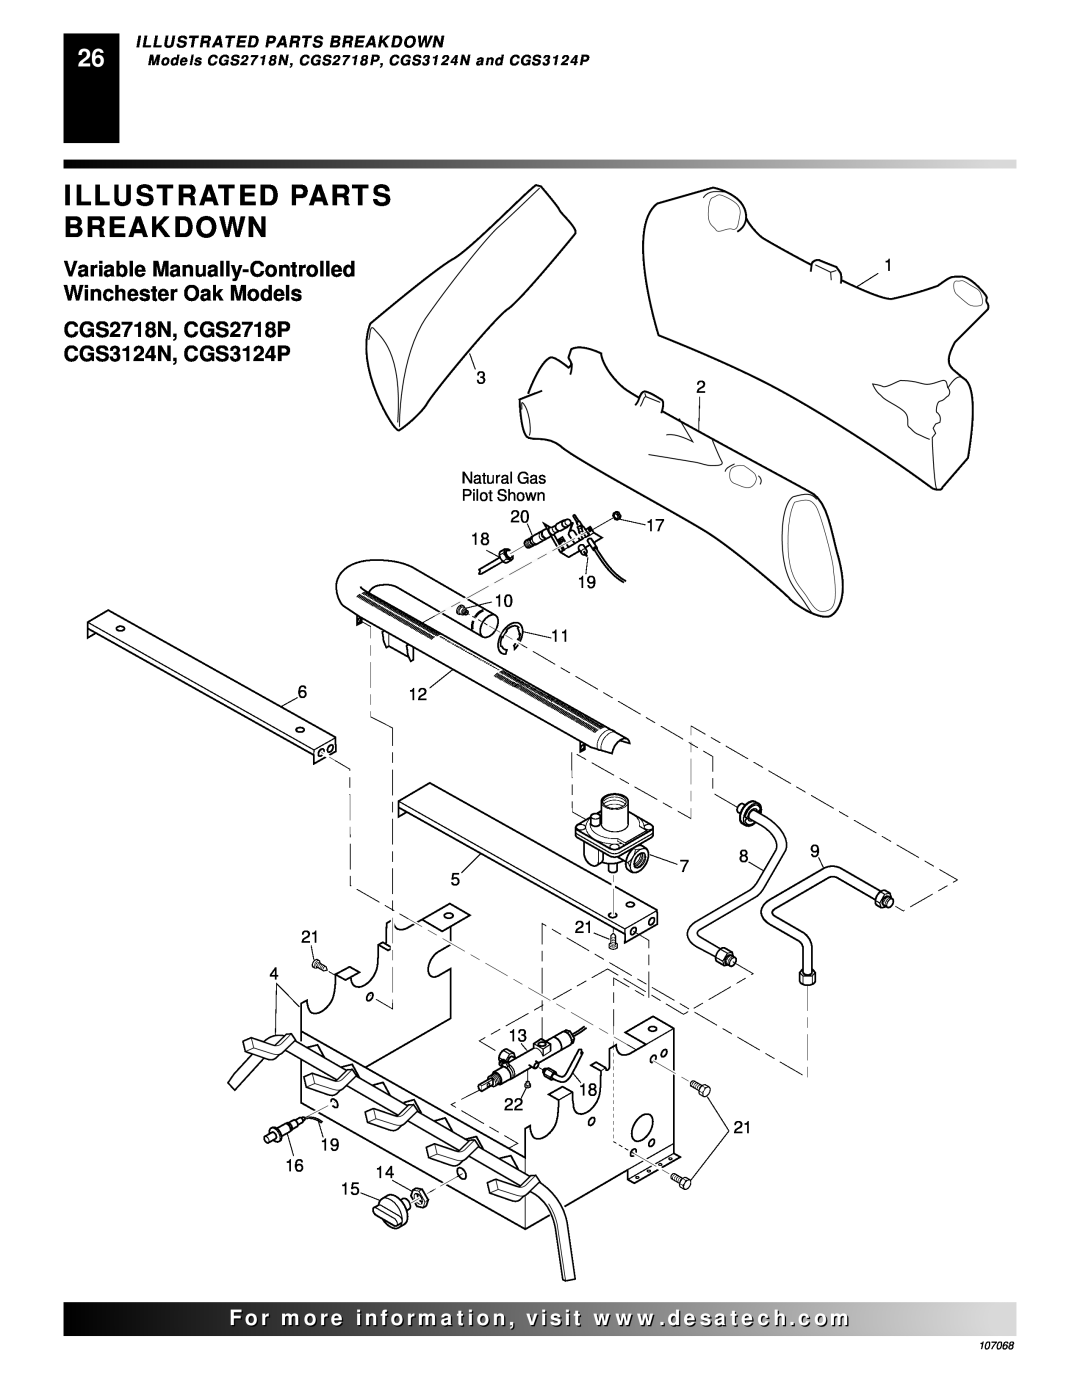 Desa CLD3018PA, CGS3124N Illustrated Parts Breakdown, Variable Manually-Controlled, Winchester Oak Models, 107068 